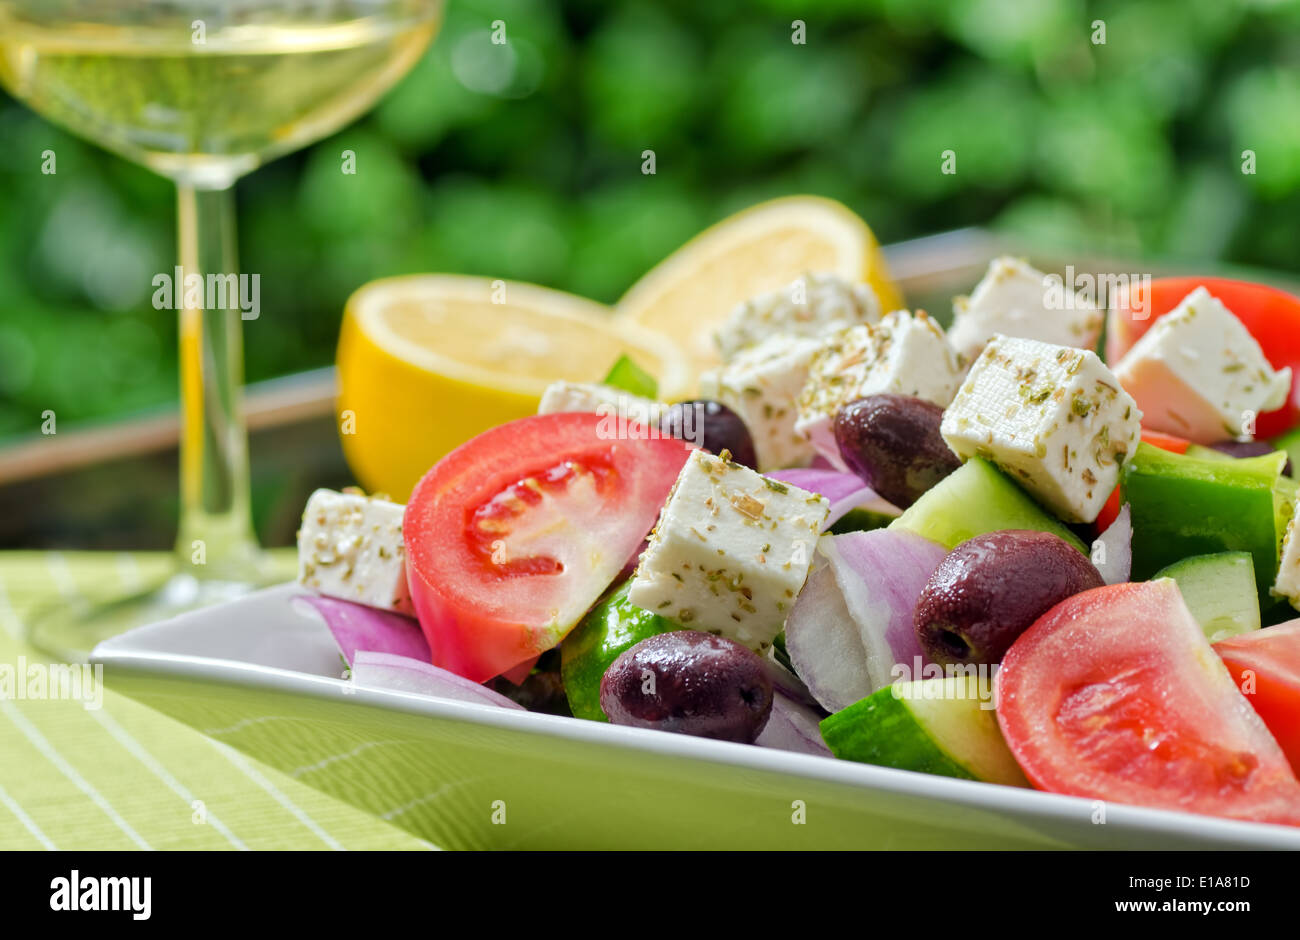 A summer fresh greek salad with tomato, cucumber, green pepper, red onion, kalamata olive, and feta cheese. Stock Photo